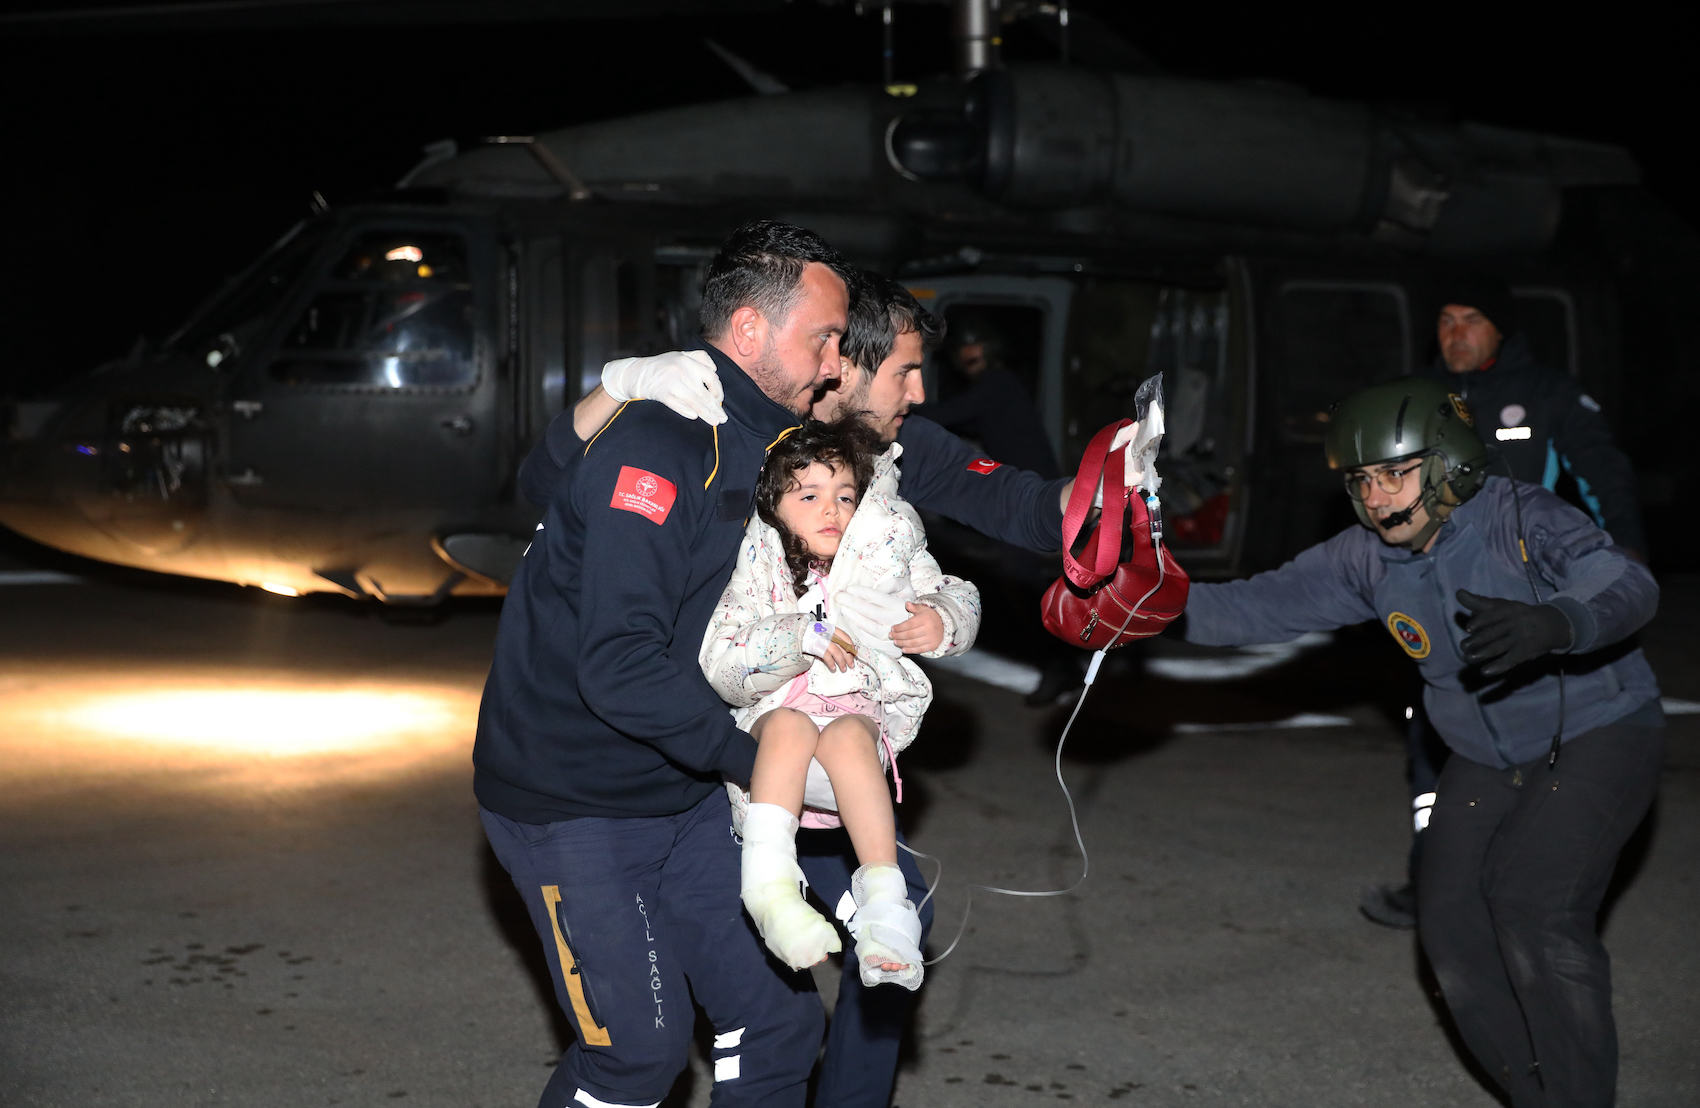 Injured people affected by earthquakes transferred to hospitals by ambulances and helicopters from the earthquake areas after 6.4 and 5.8 magnitude earthquakes hit the Hatay